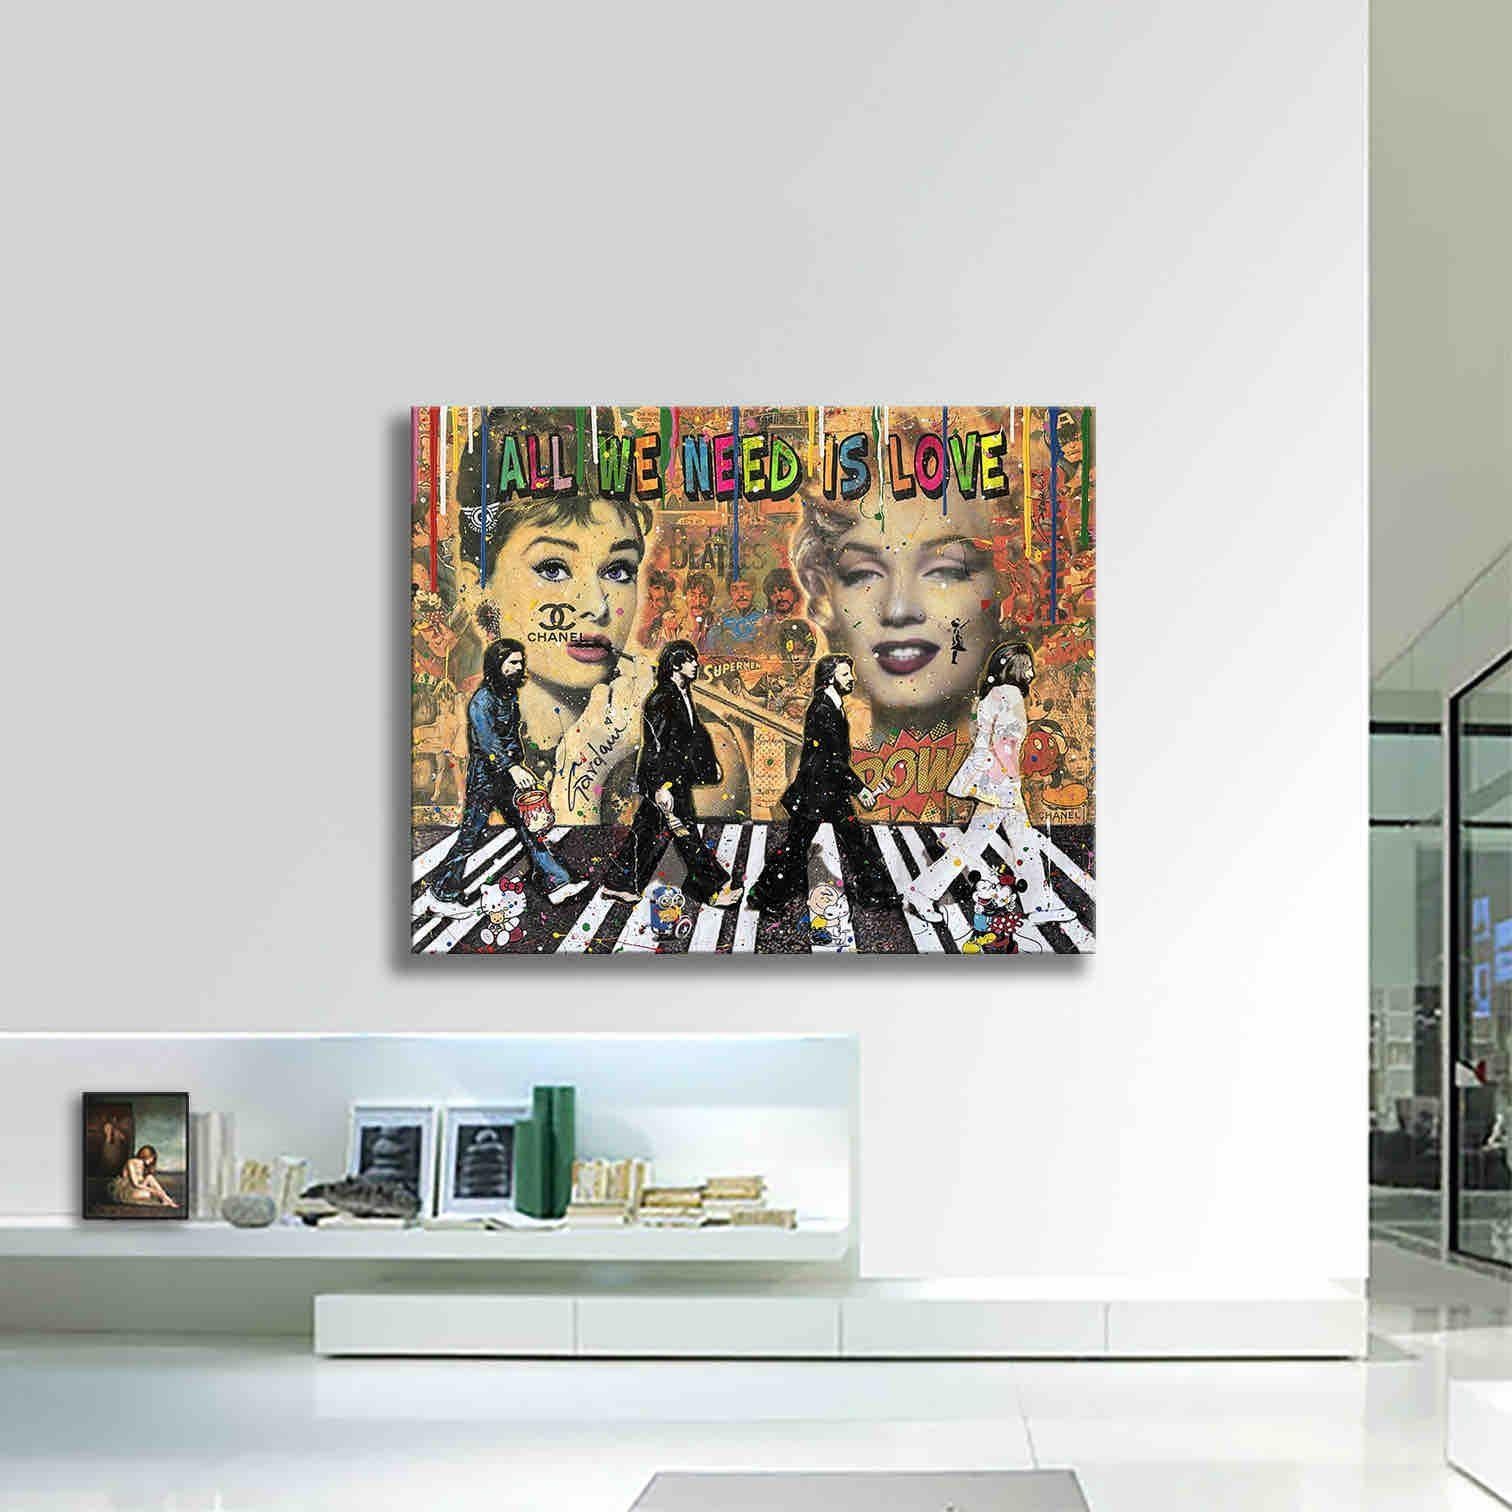 One-of-a-kind Pop Art Original Painting on Canvas by Gardani available for you. Hand signed by the Artist front and back, comes with official Gardani Certificate of Authenticity with a unique dollar bill sequence as a registration matching number of